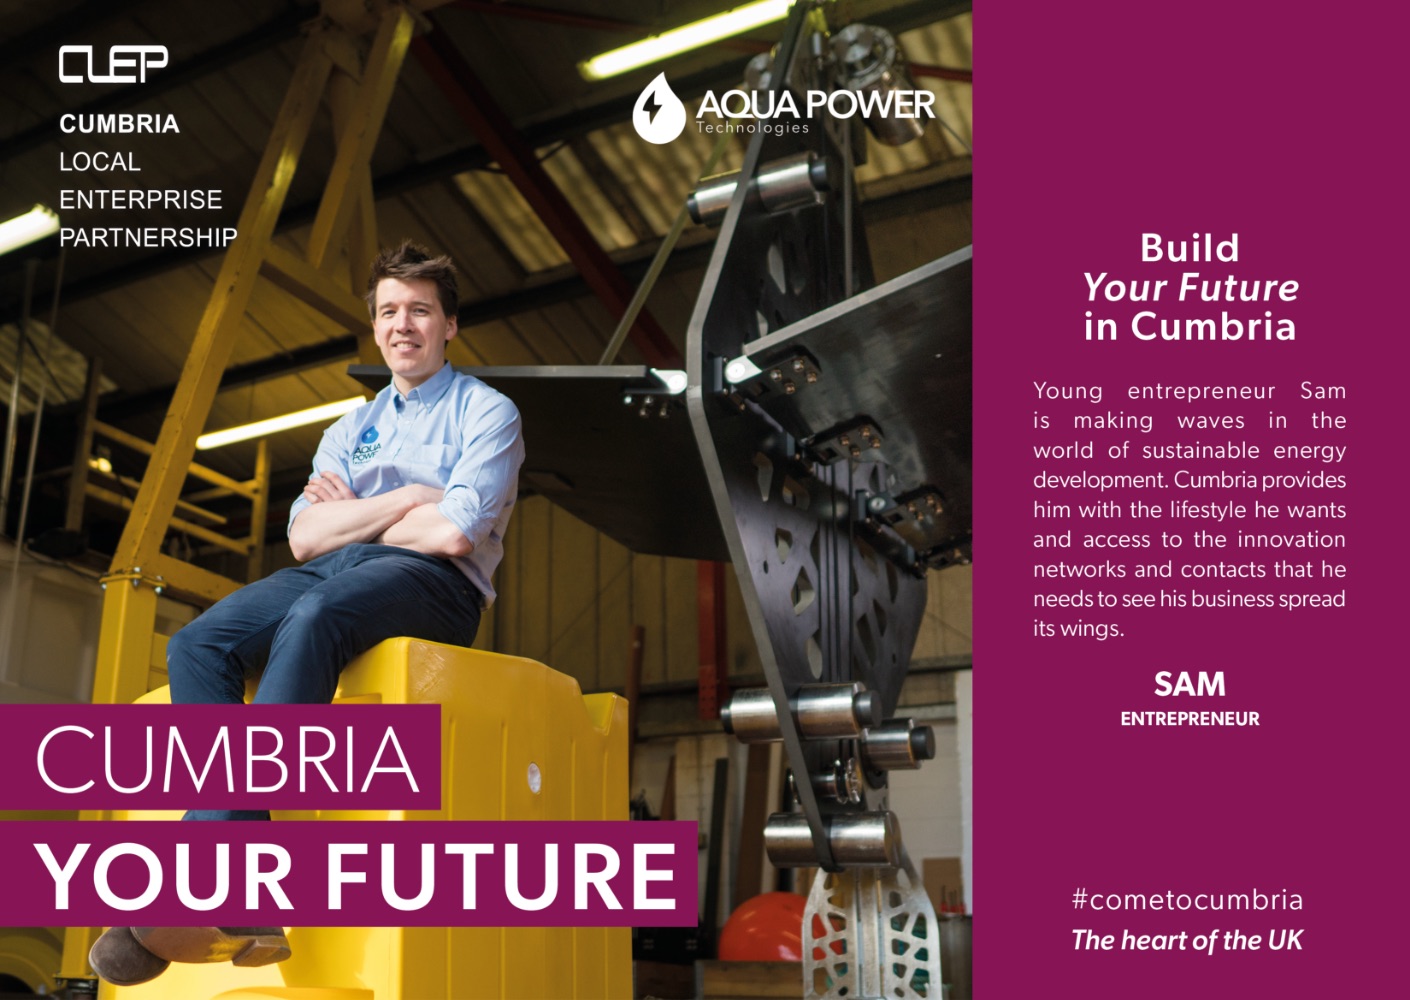 Build Your Future In Cumbria: Young entrepreneur Same is making waves in the world of sustainable energy development. Cumbria provides him with the lifestyle he wants and access to the innovation networks and contacts that he needs to see his business spread its wings. (Photo: Sam, entrepreneur).